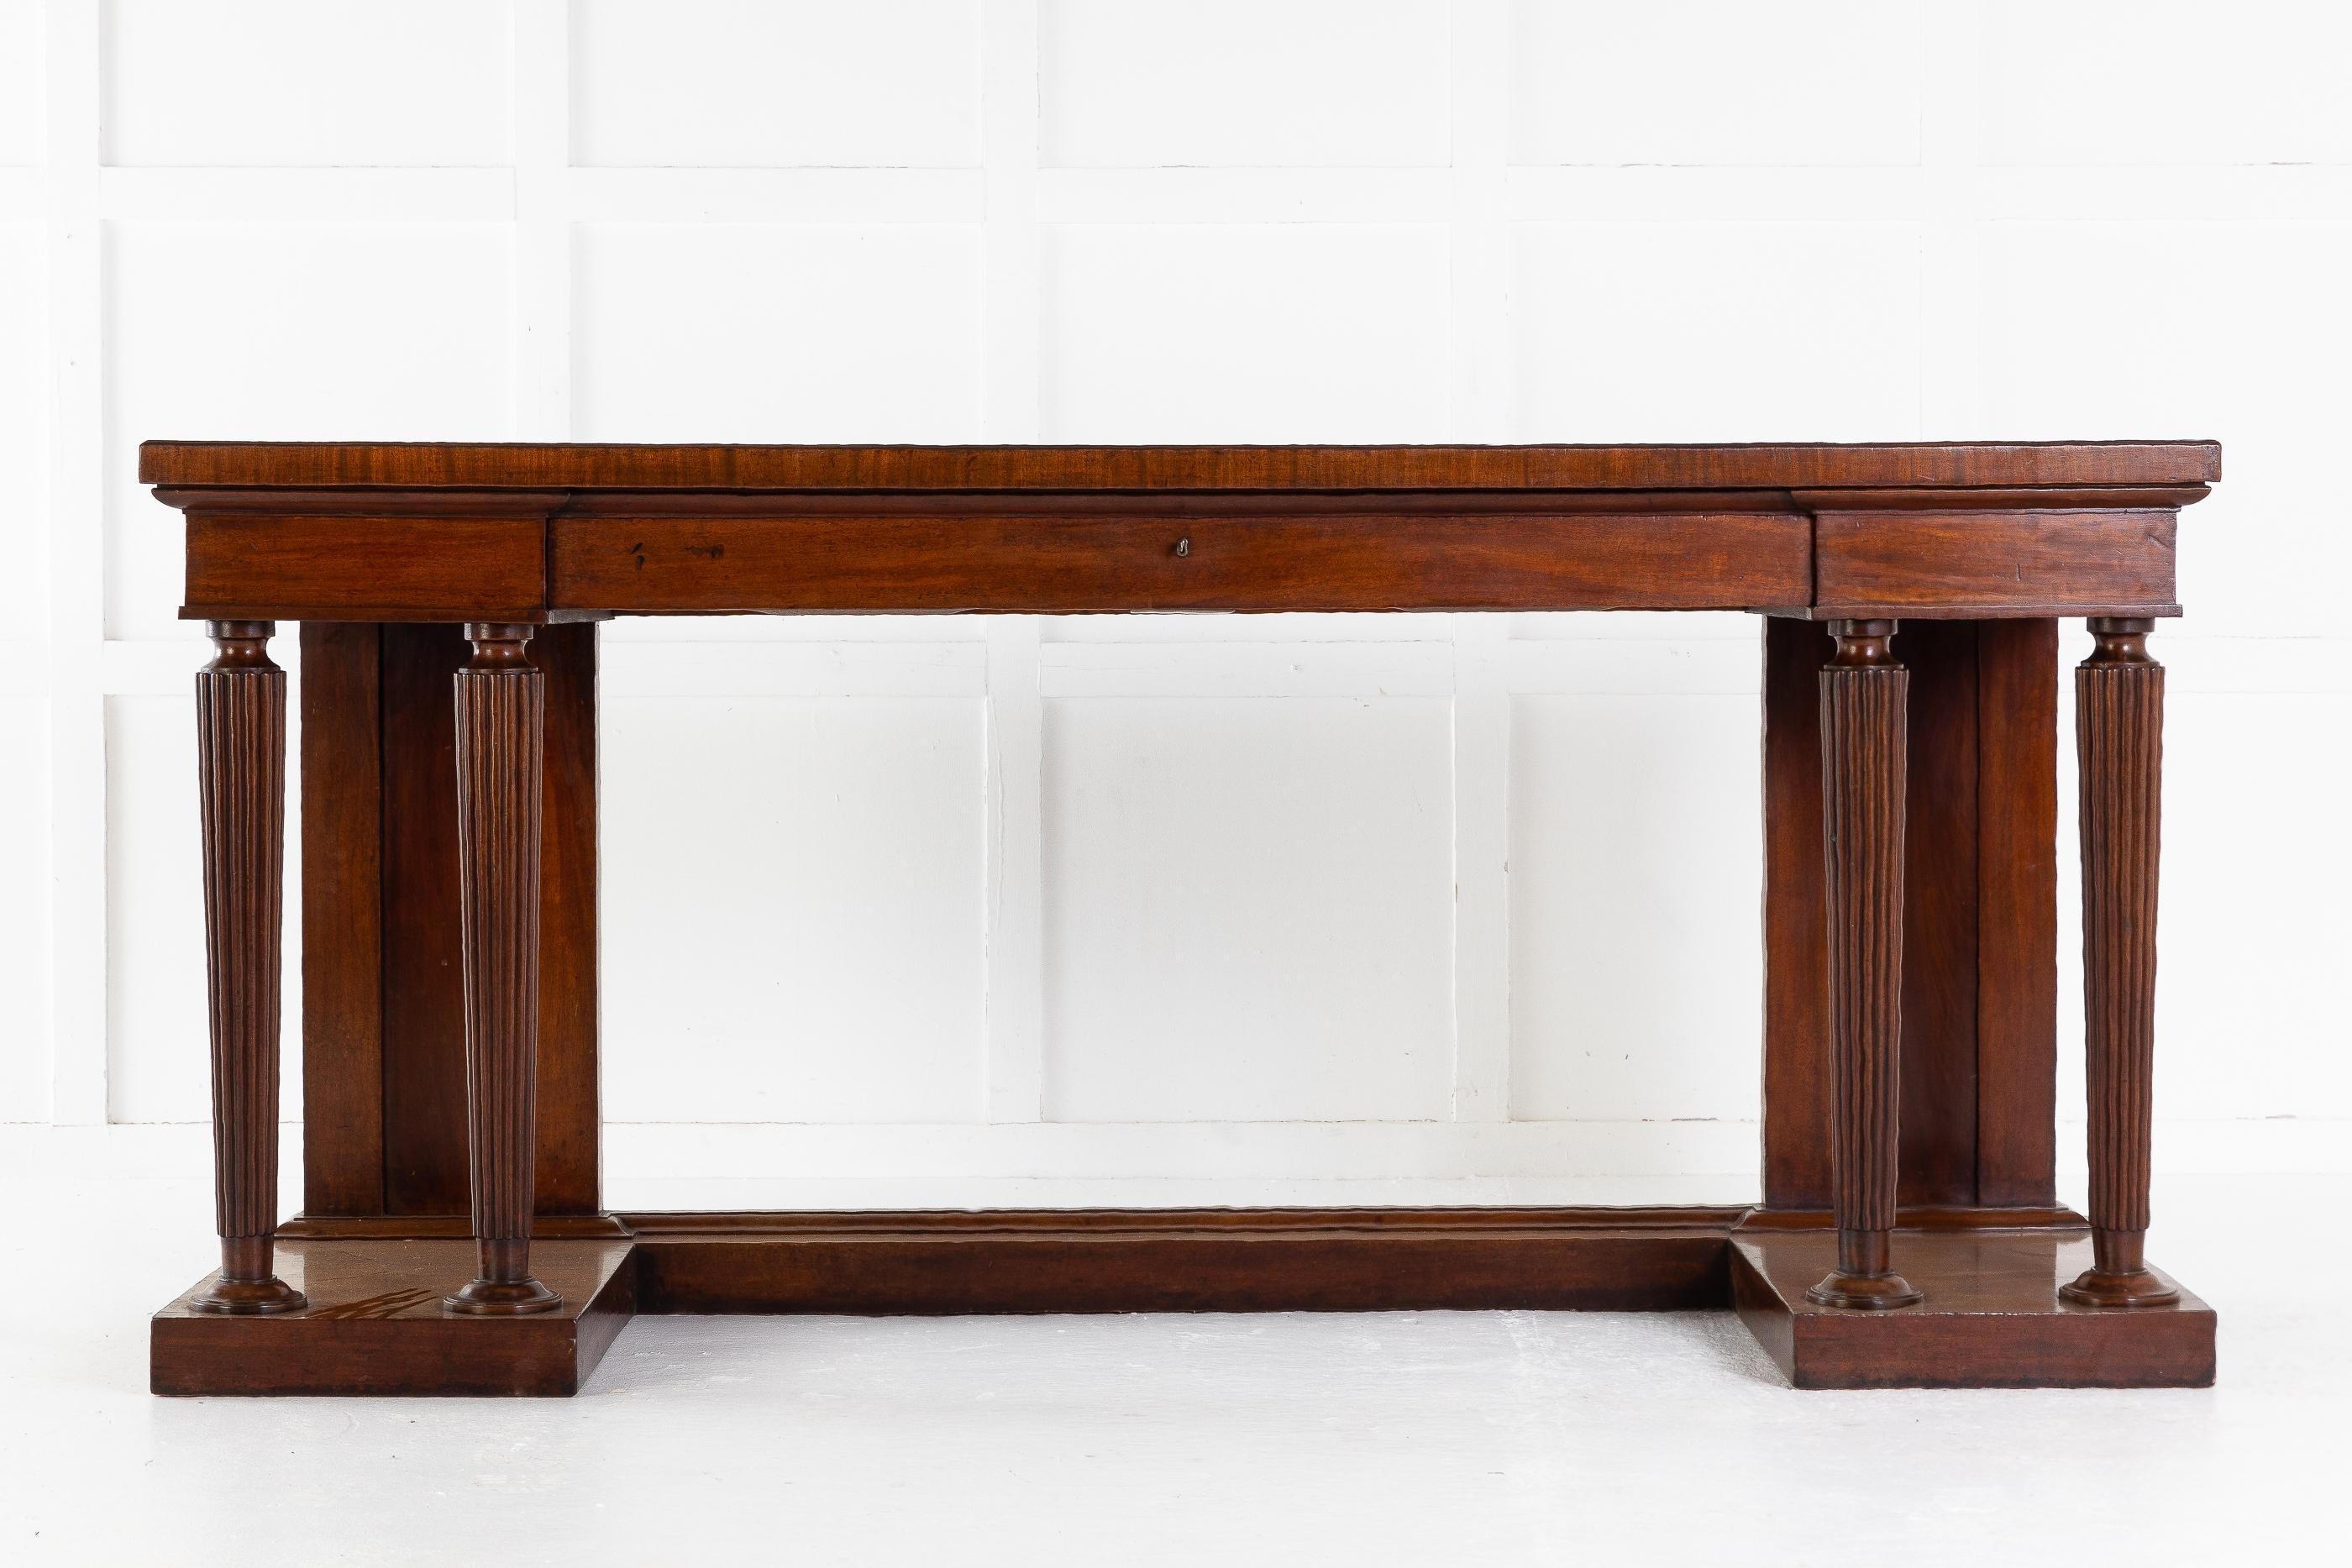 An imposing Regency mahogany neoclassical side table/serving table, in the manner of Gillows. Having a well figured rectangular top with a slender moulding and crossbanded edge, above an inverted breakfront frieze incorporating a long central drawer